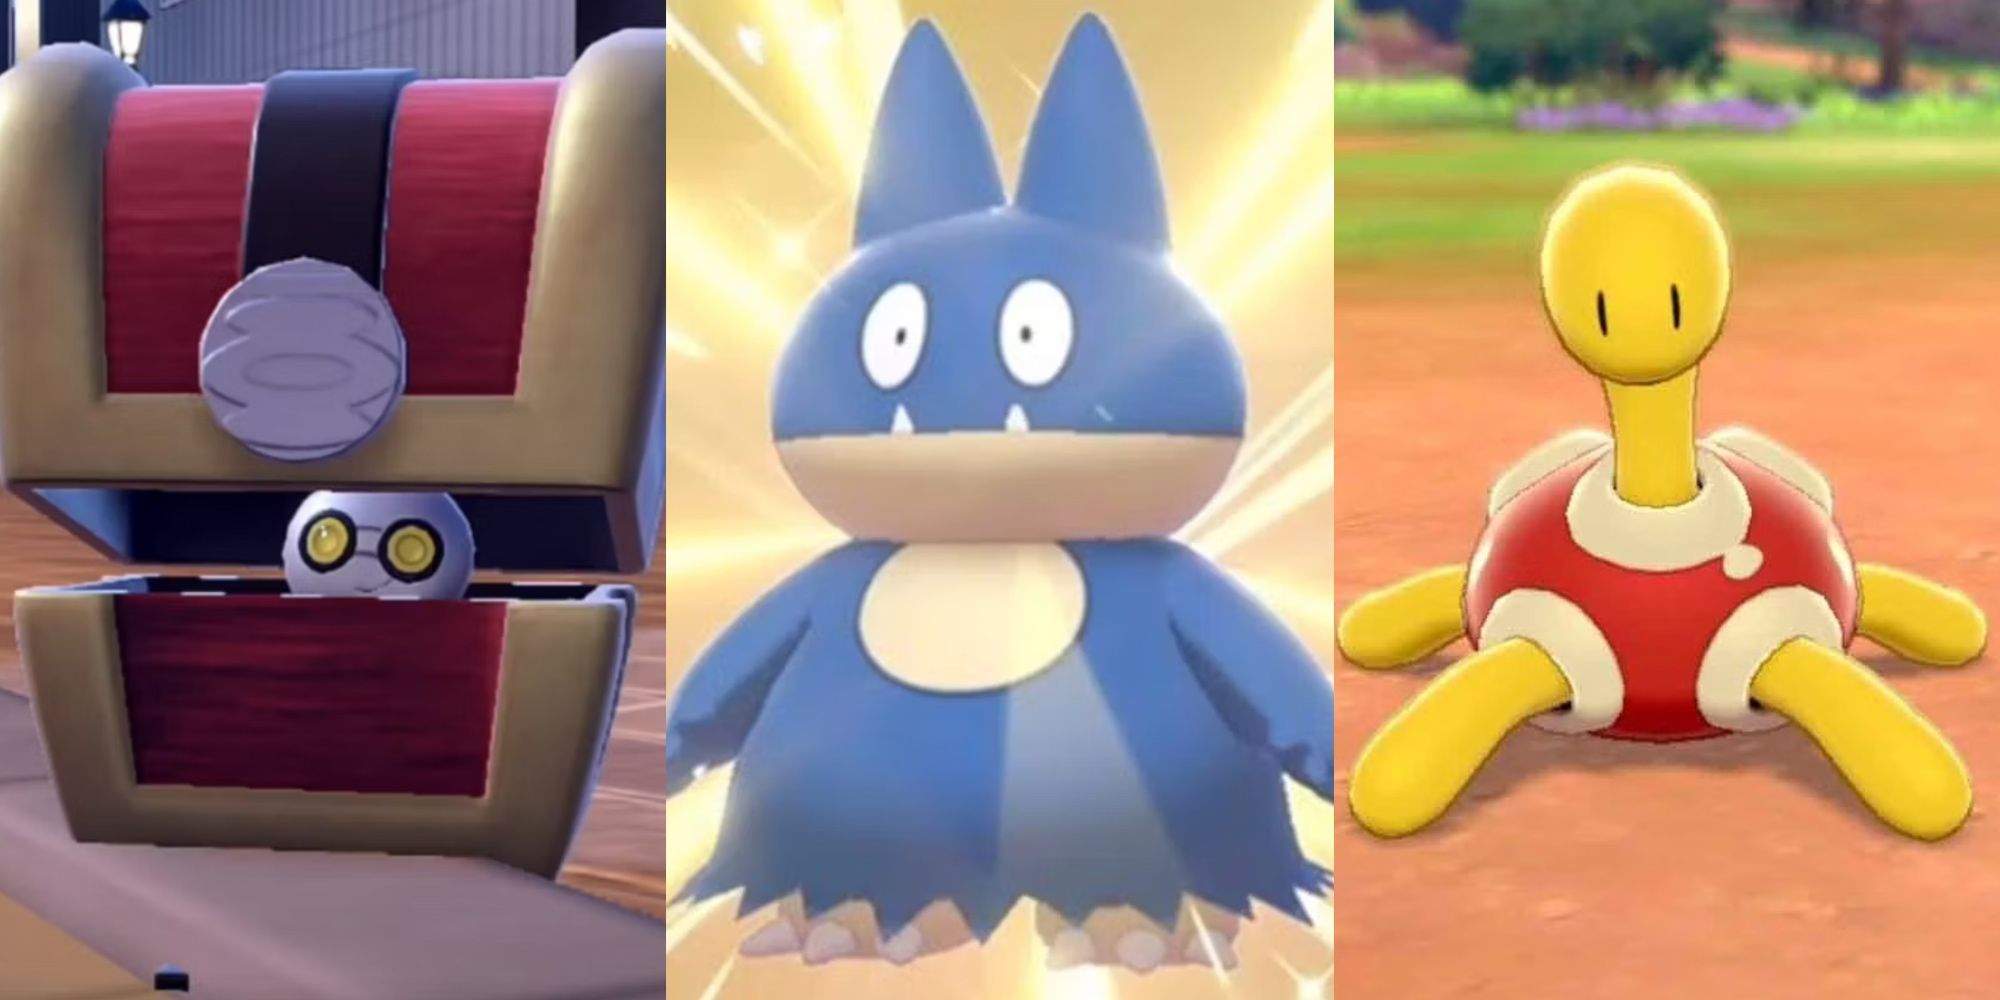 A split image of Gimmighoul hidinng, Munchlax staring blankly, and Shuckle sitting on a dirty ground in Pokemon.